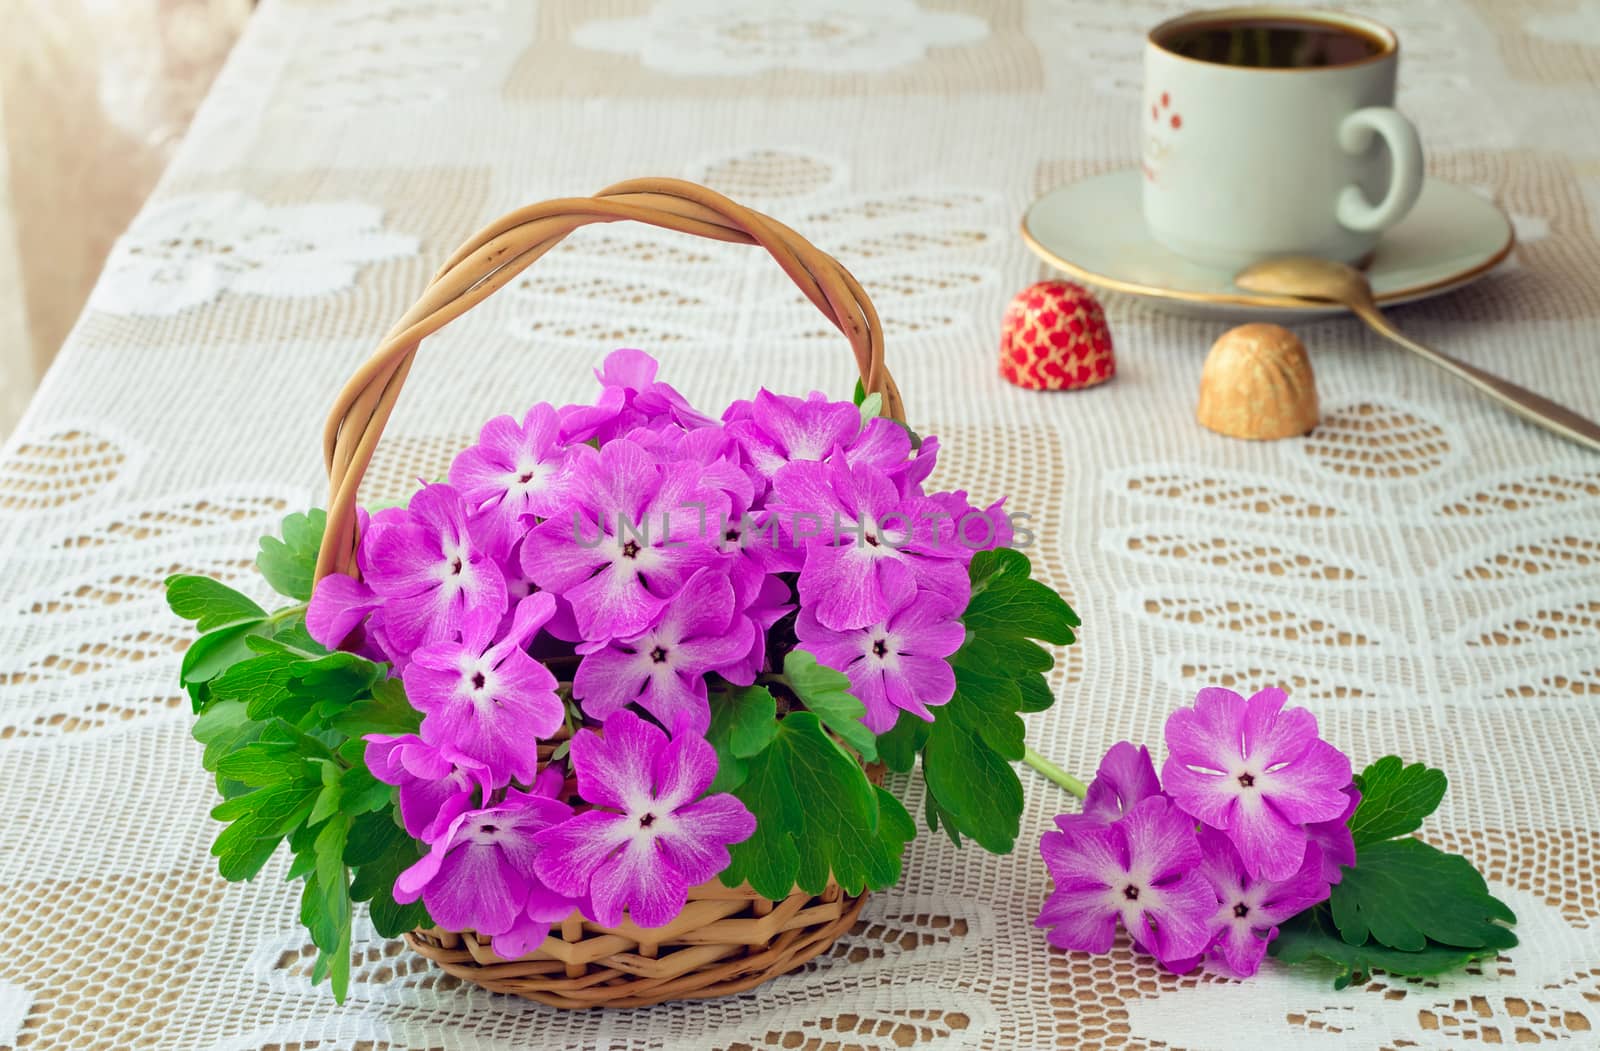  On a table on a lacy cloth there is a basket with flowers of a violet, on a coffee and candy background.